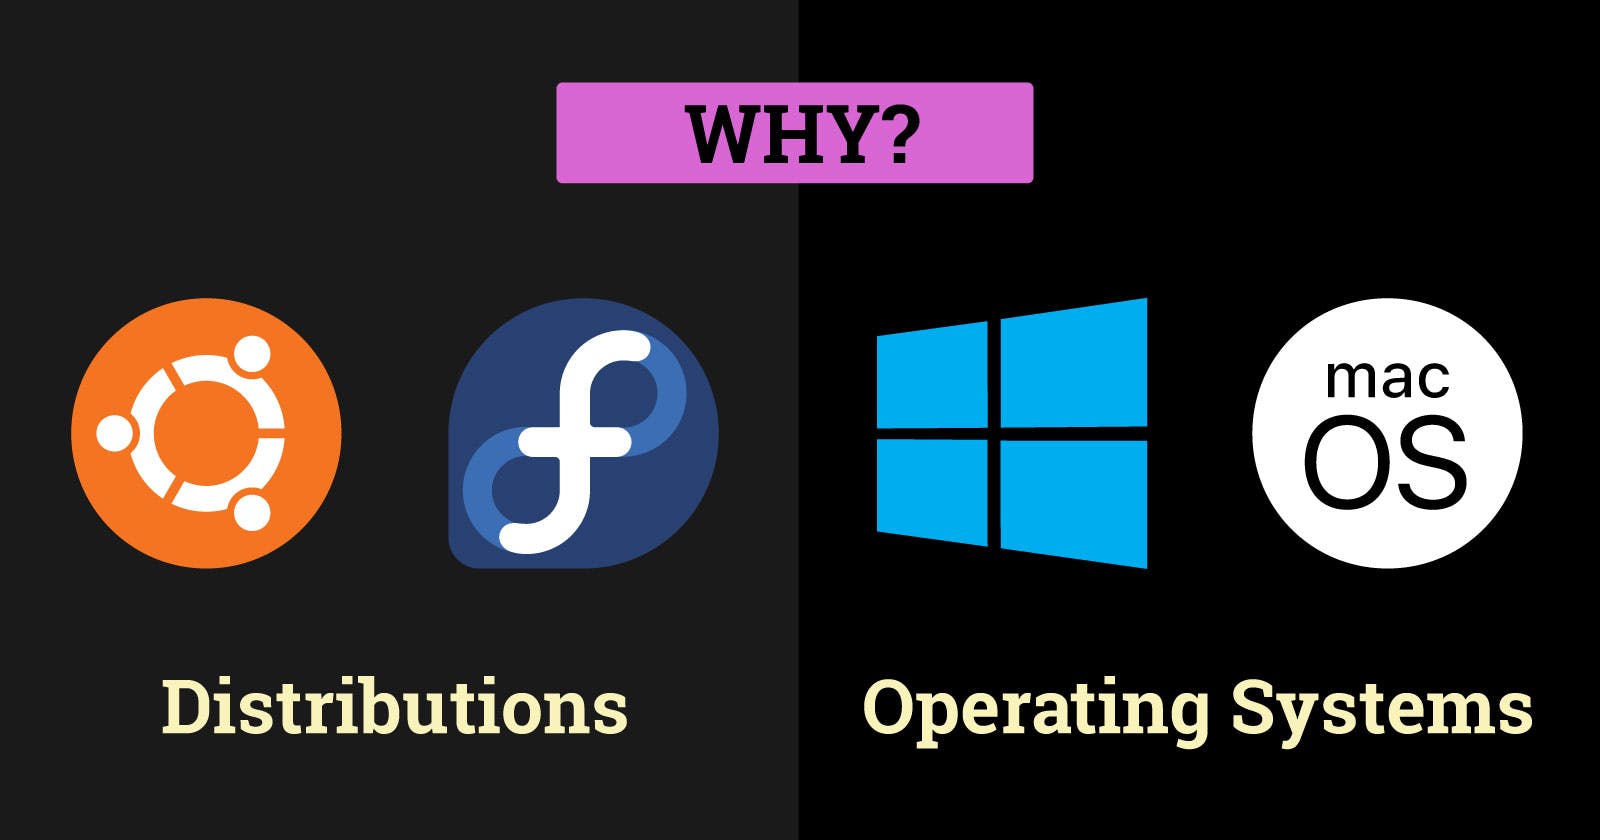 Why is Ubuntu a Distribution and Windows an Operating System?